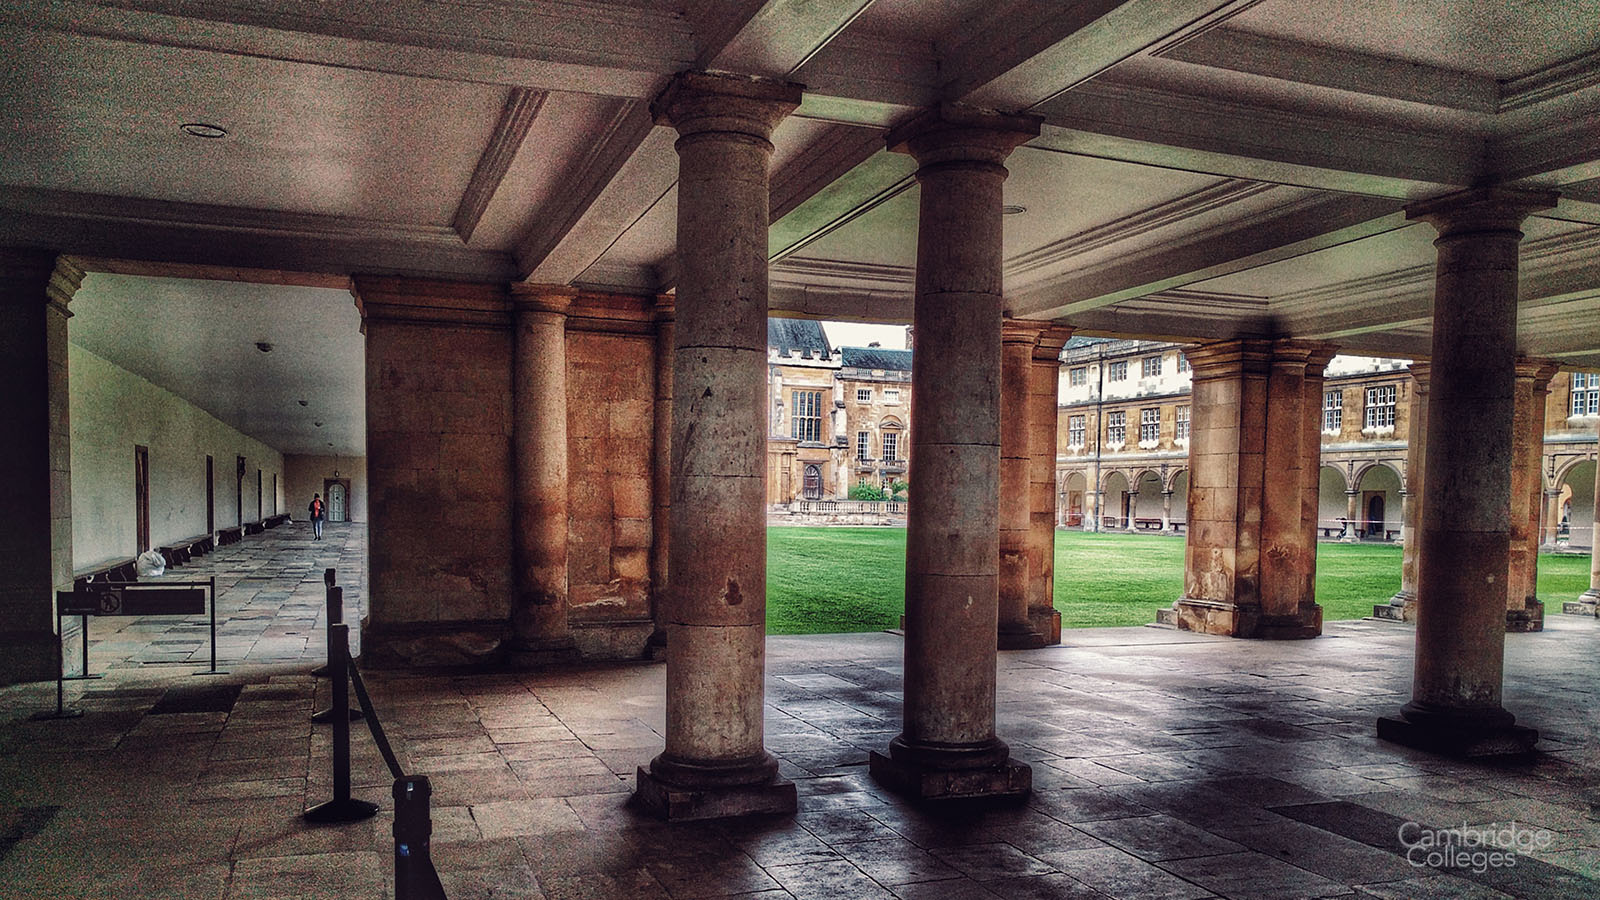 The open cloister underneath the Wren library